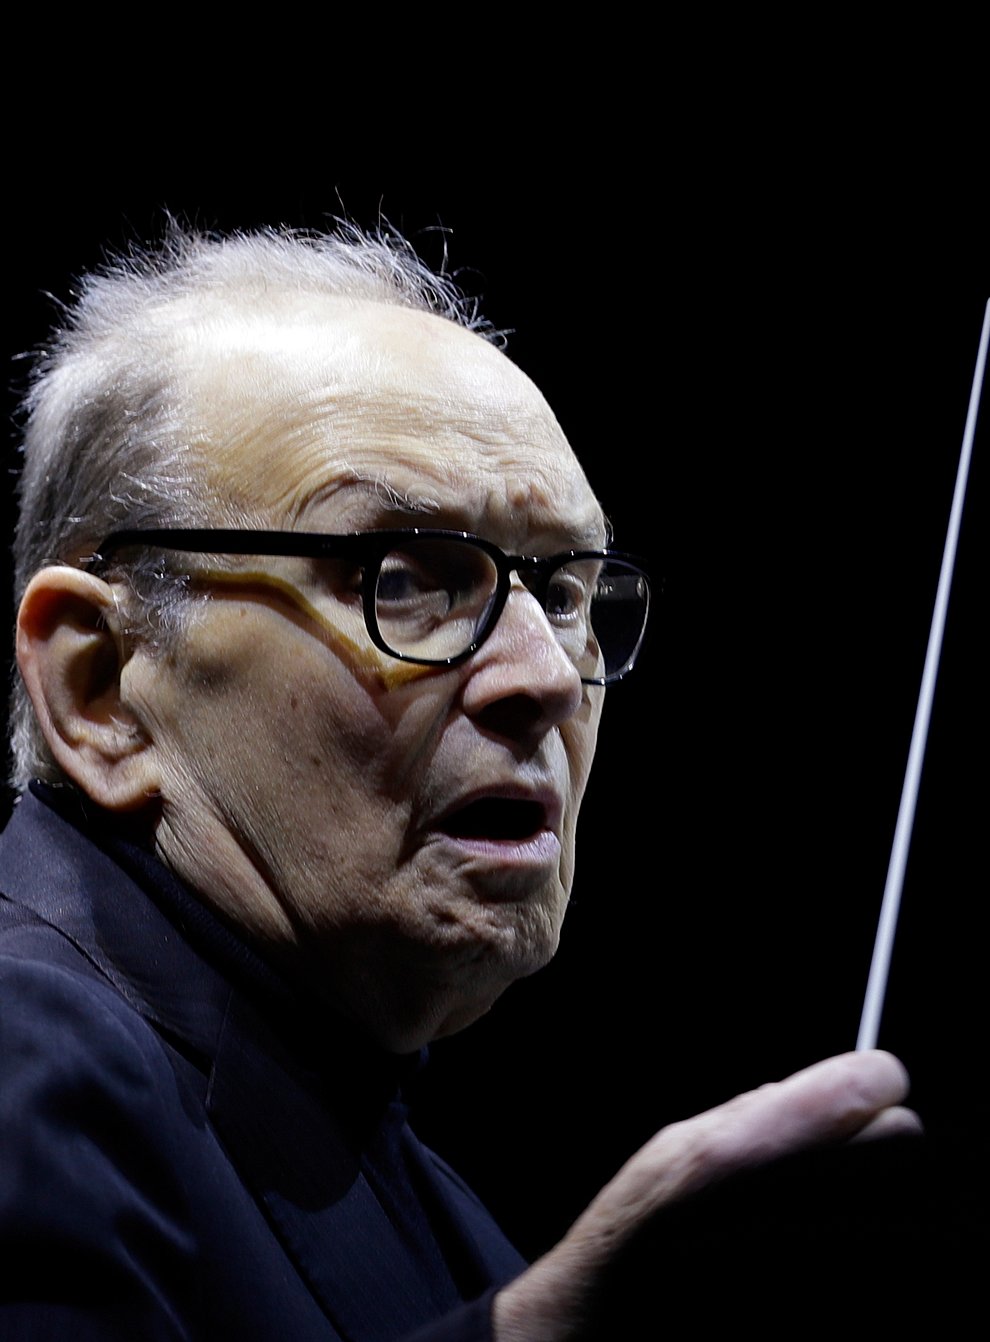 Ennio Morricone died in hospital on Monday